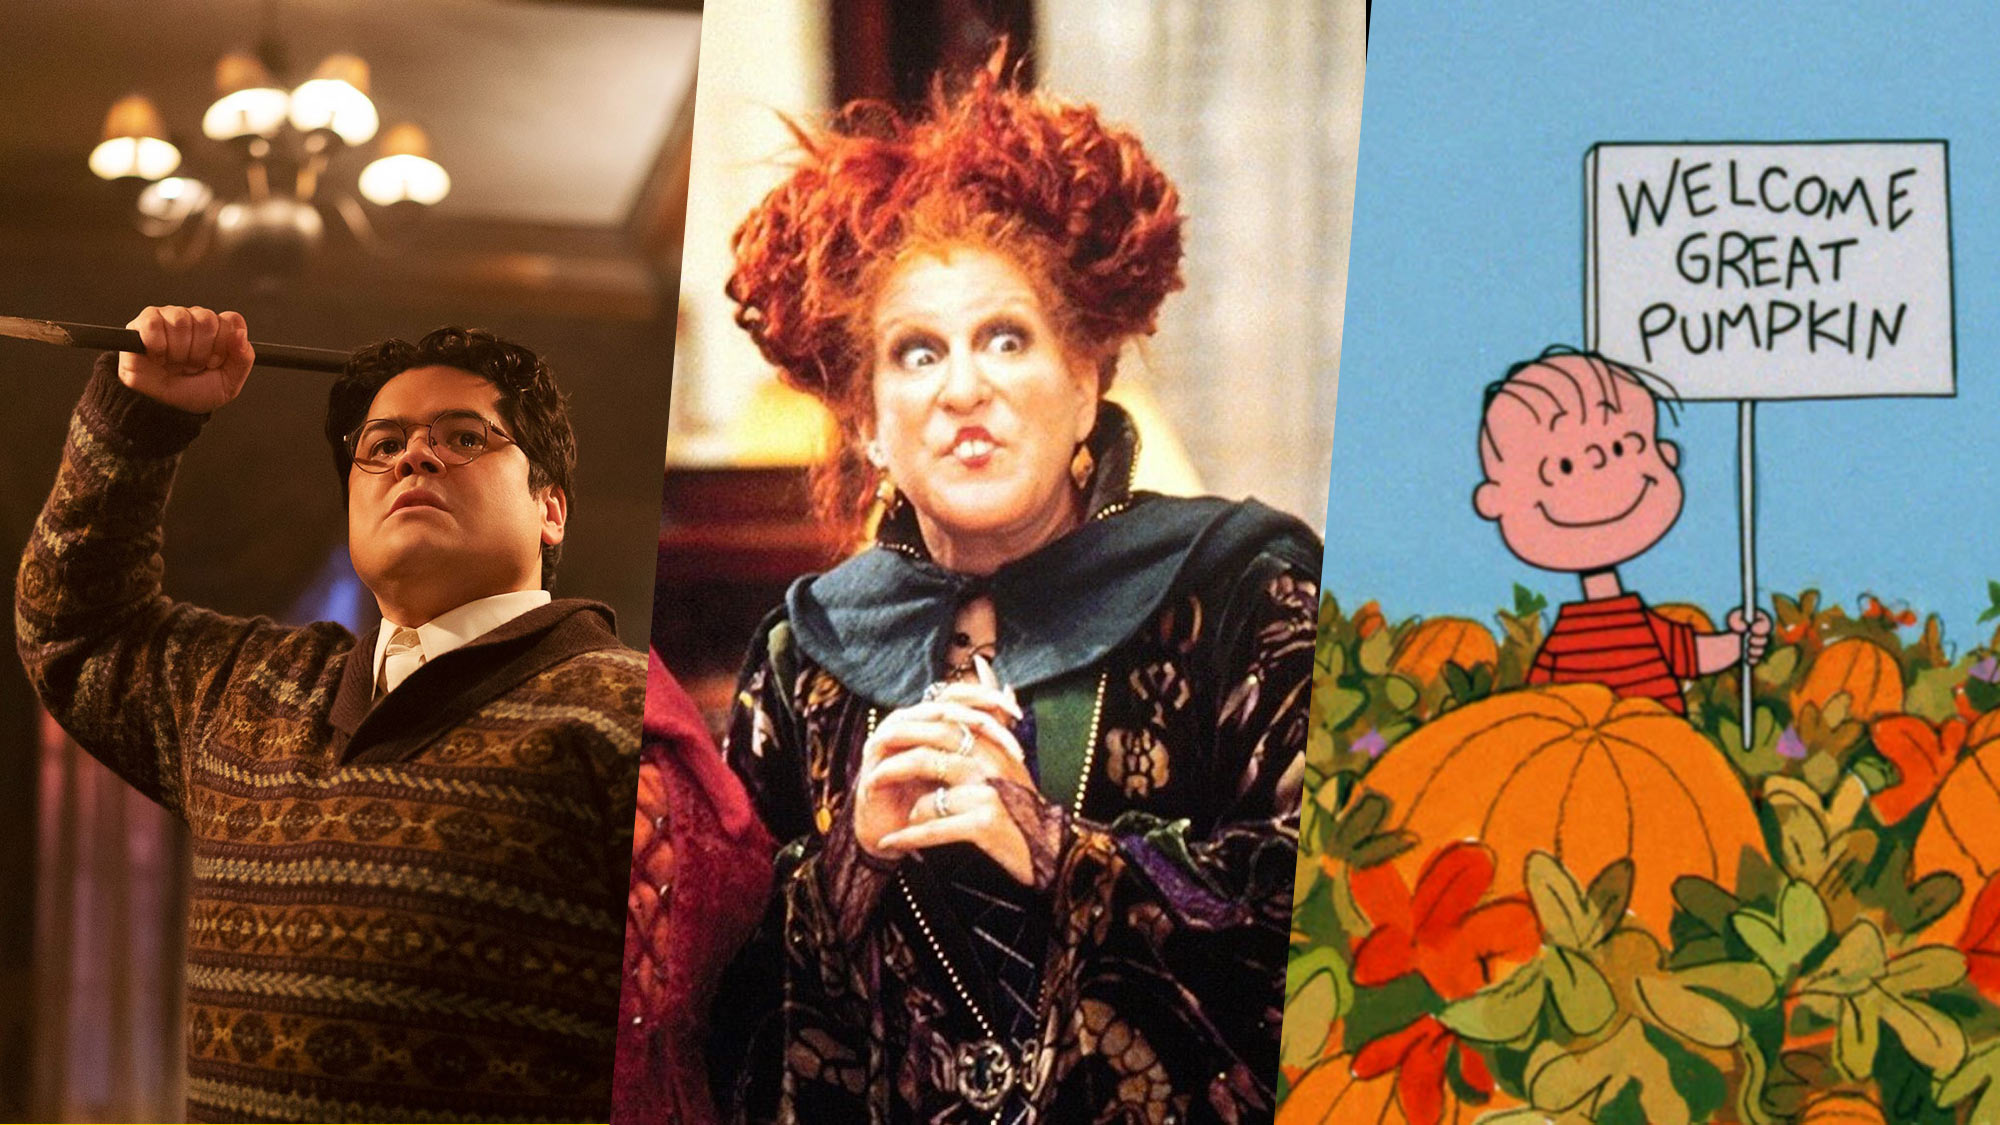 20 best Halloween movies and shows for folks who hate scary stuff Tom